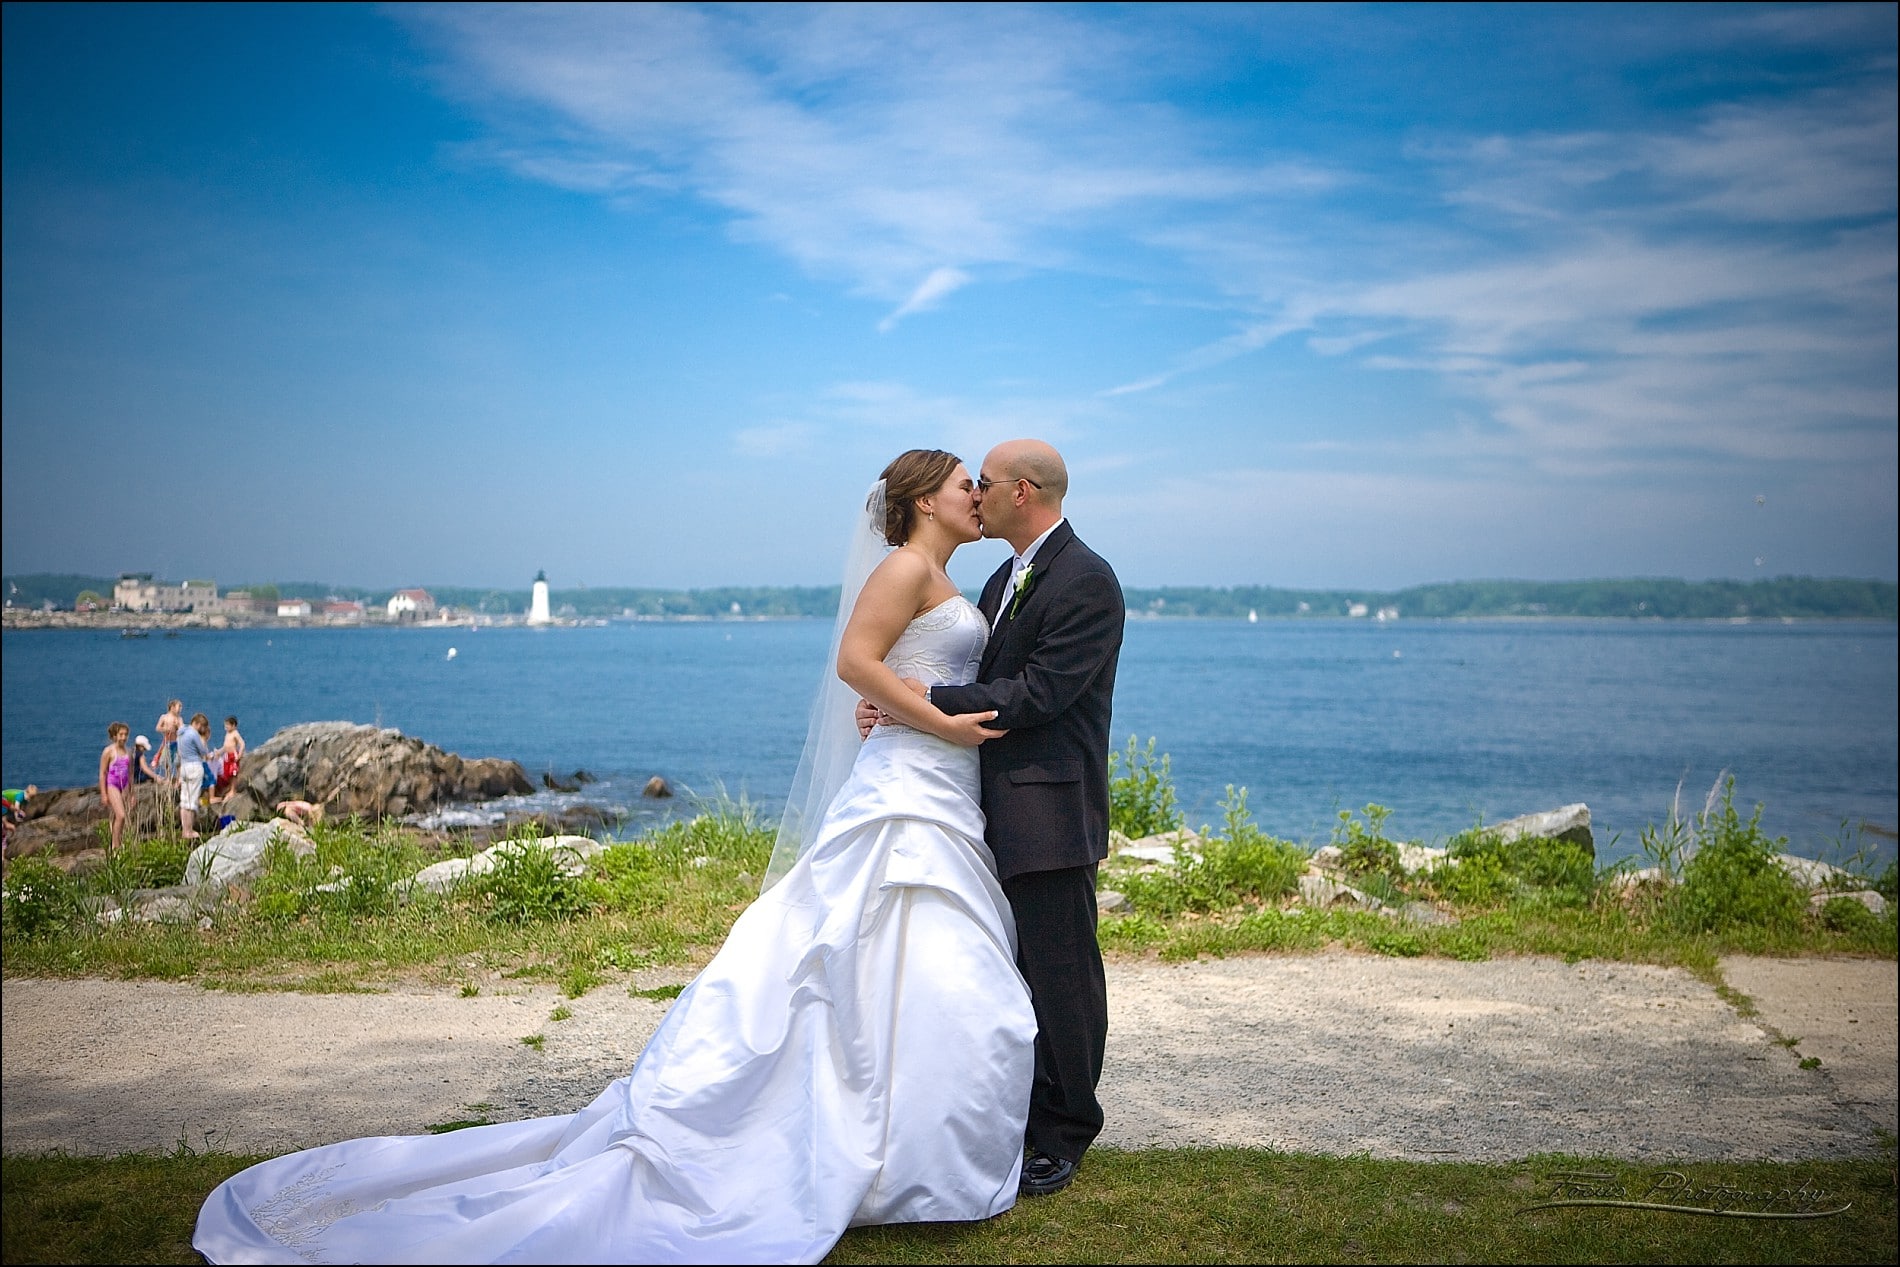 wedding photography at sheraton portsmouth hotel in new hampshire